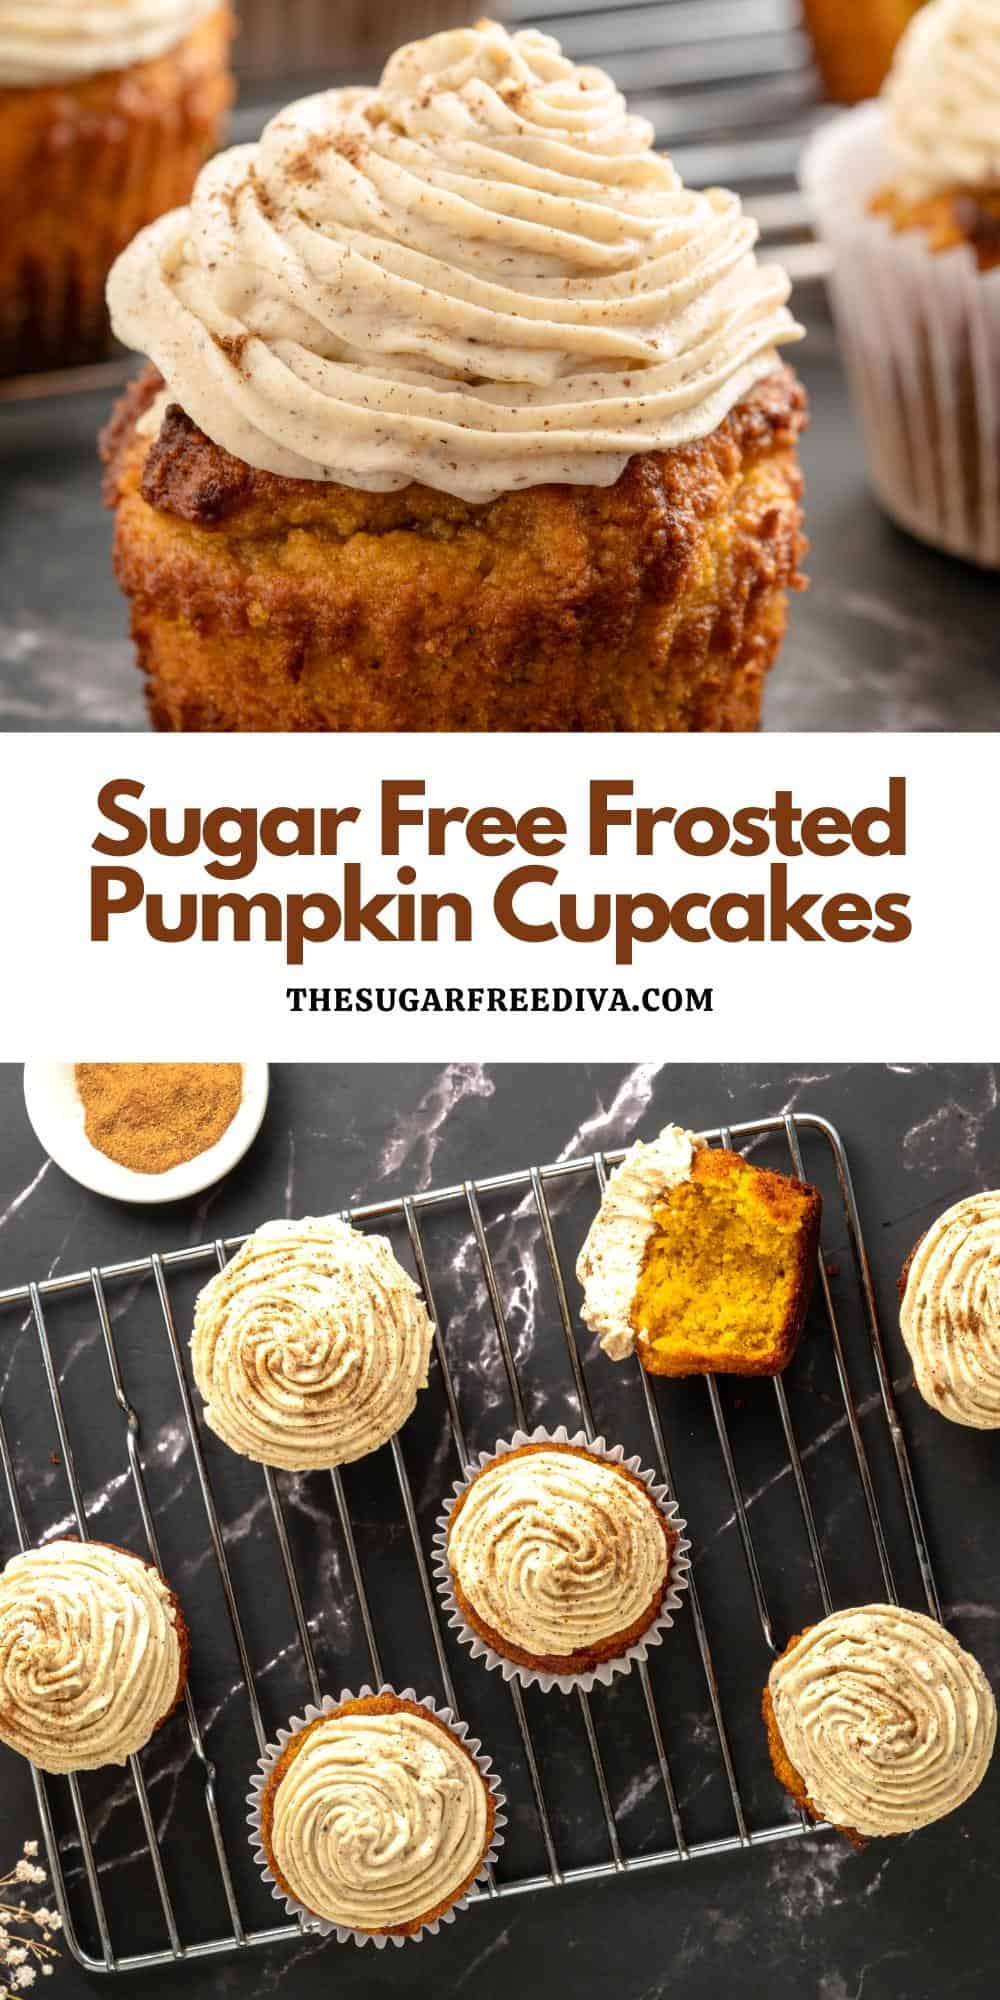 Sugar Free Frosted Pumpkin Cupcakes, a simple recipe for a tasty fall dessert with cinnamon frosting made with no added sugar.